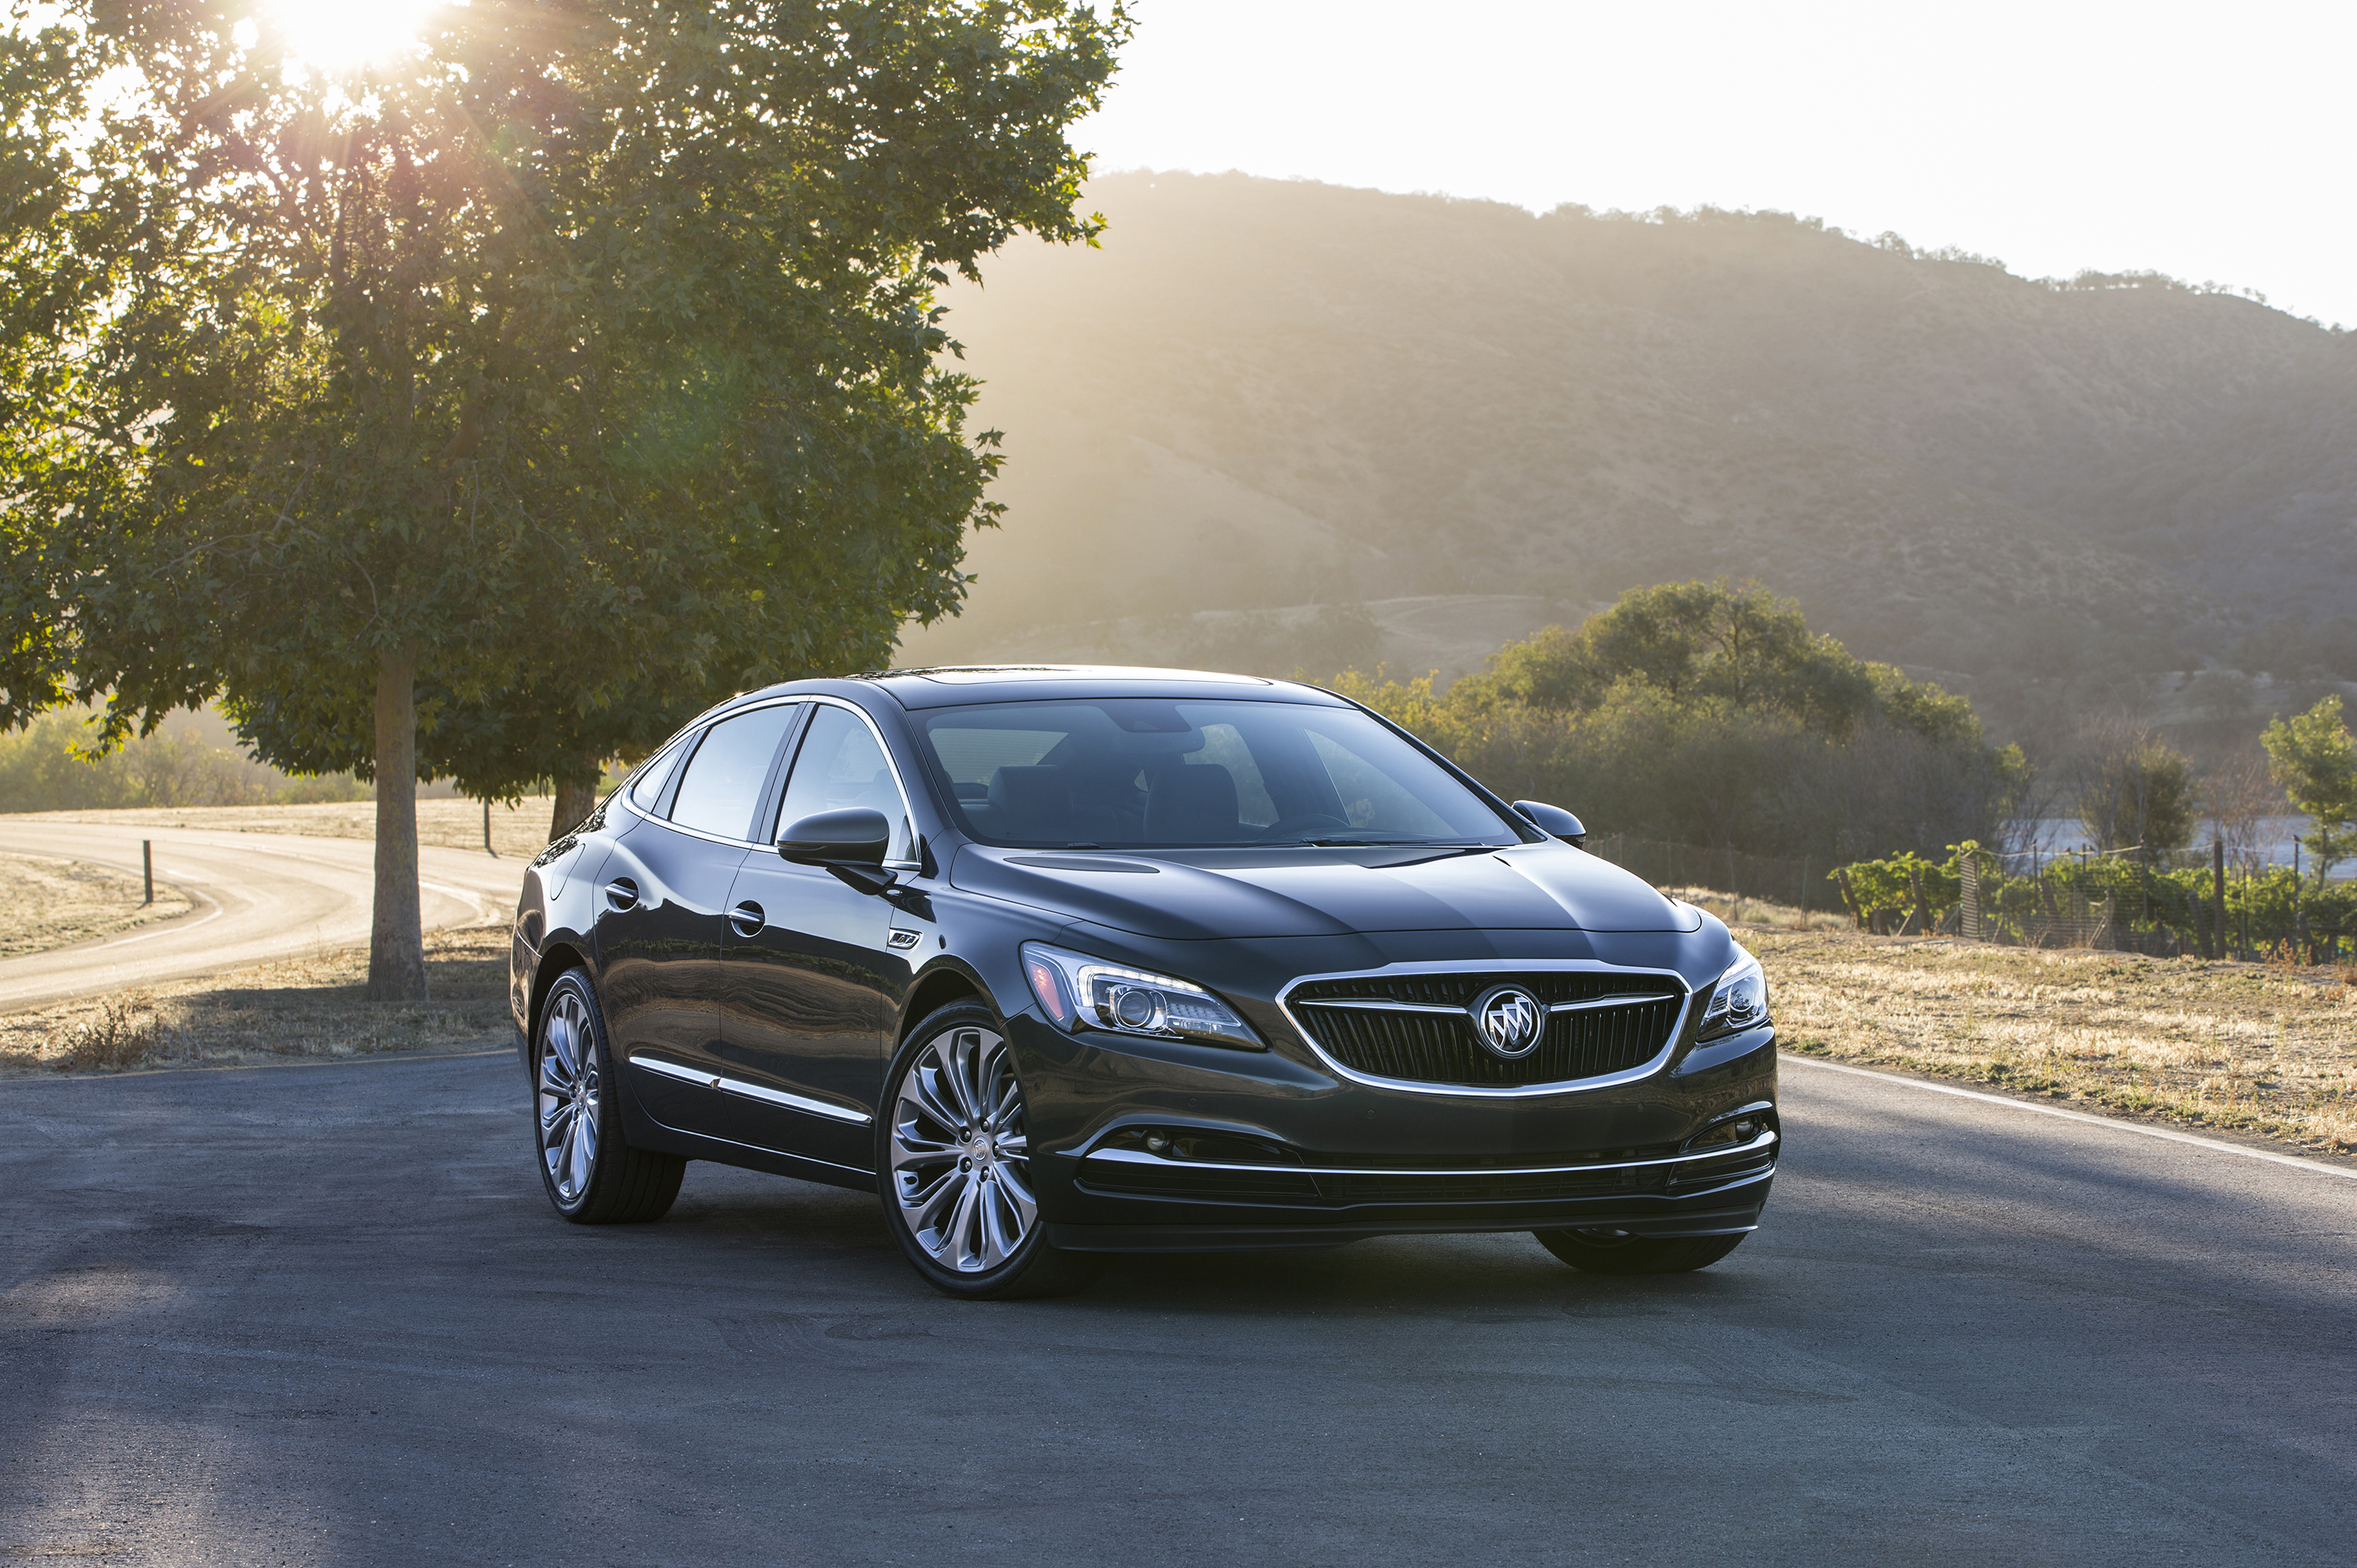 Vehicles Buick LaCrosse HD Wallpaper | Background Image